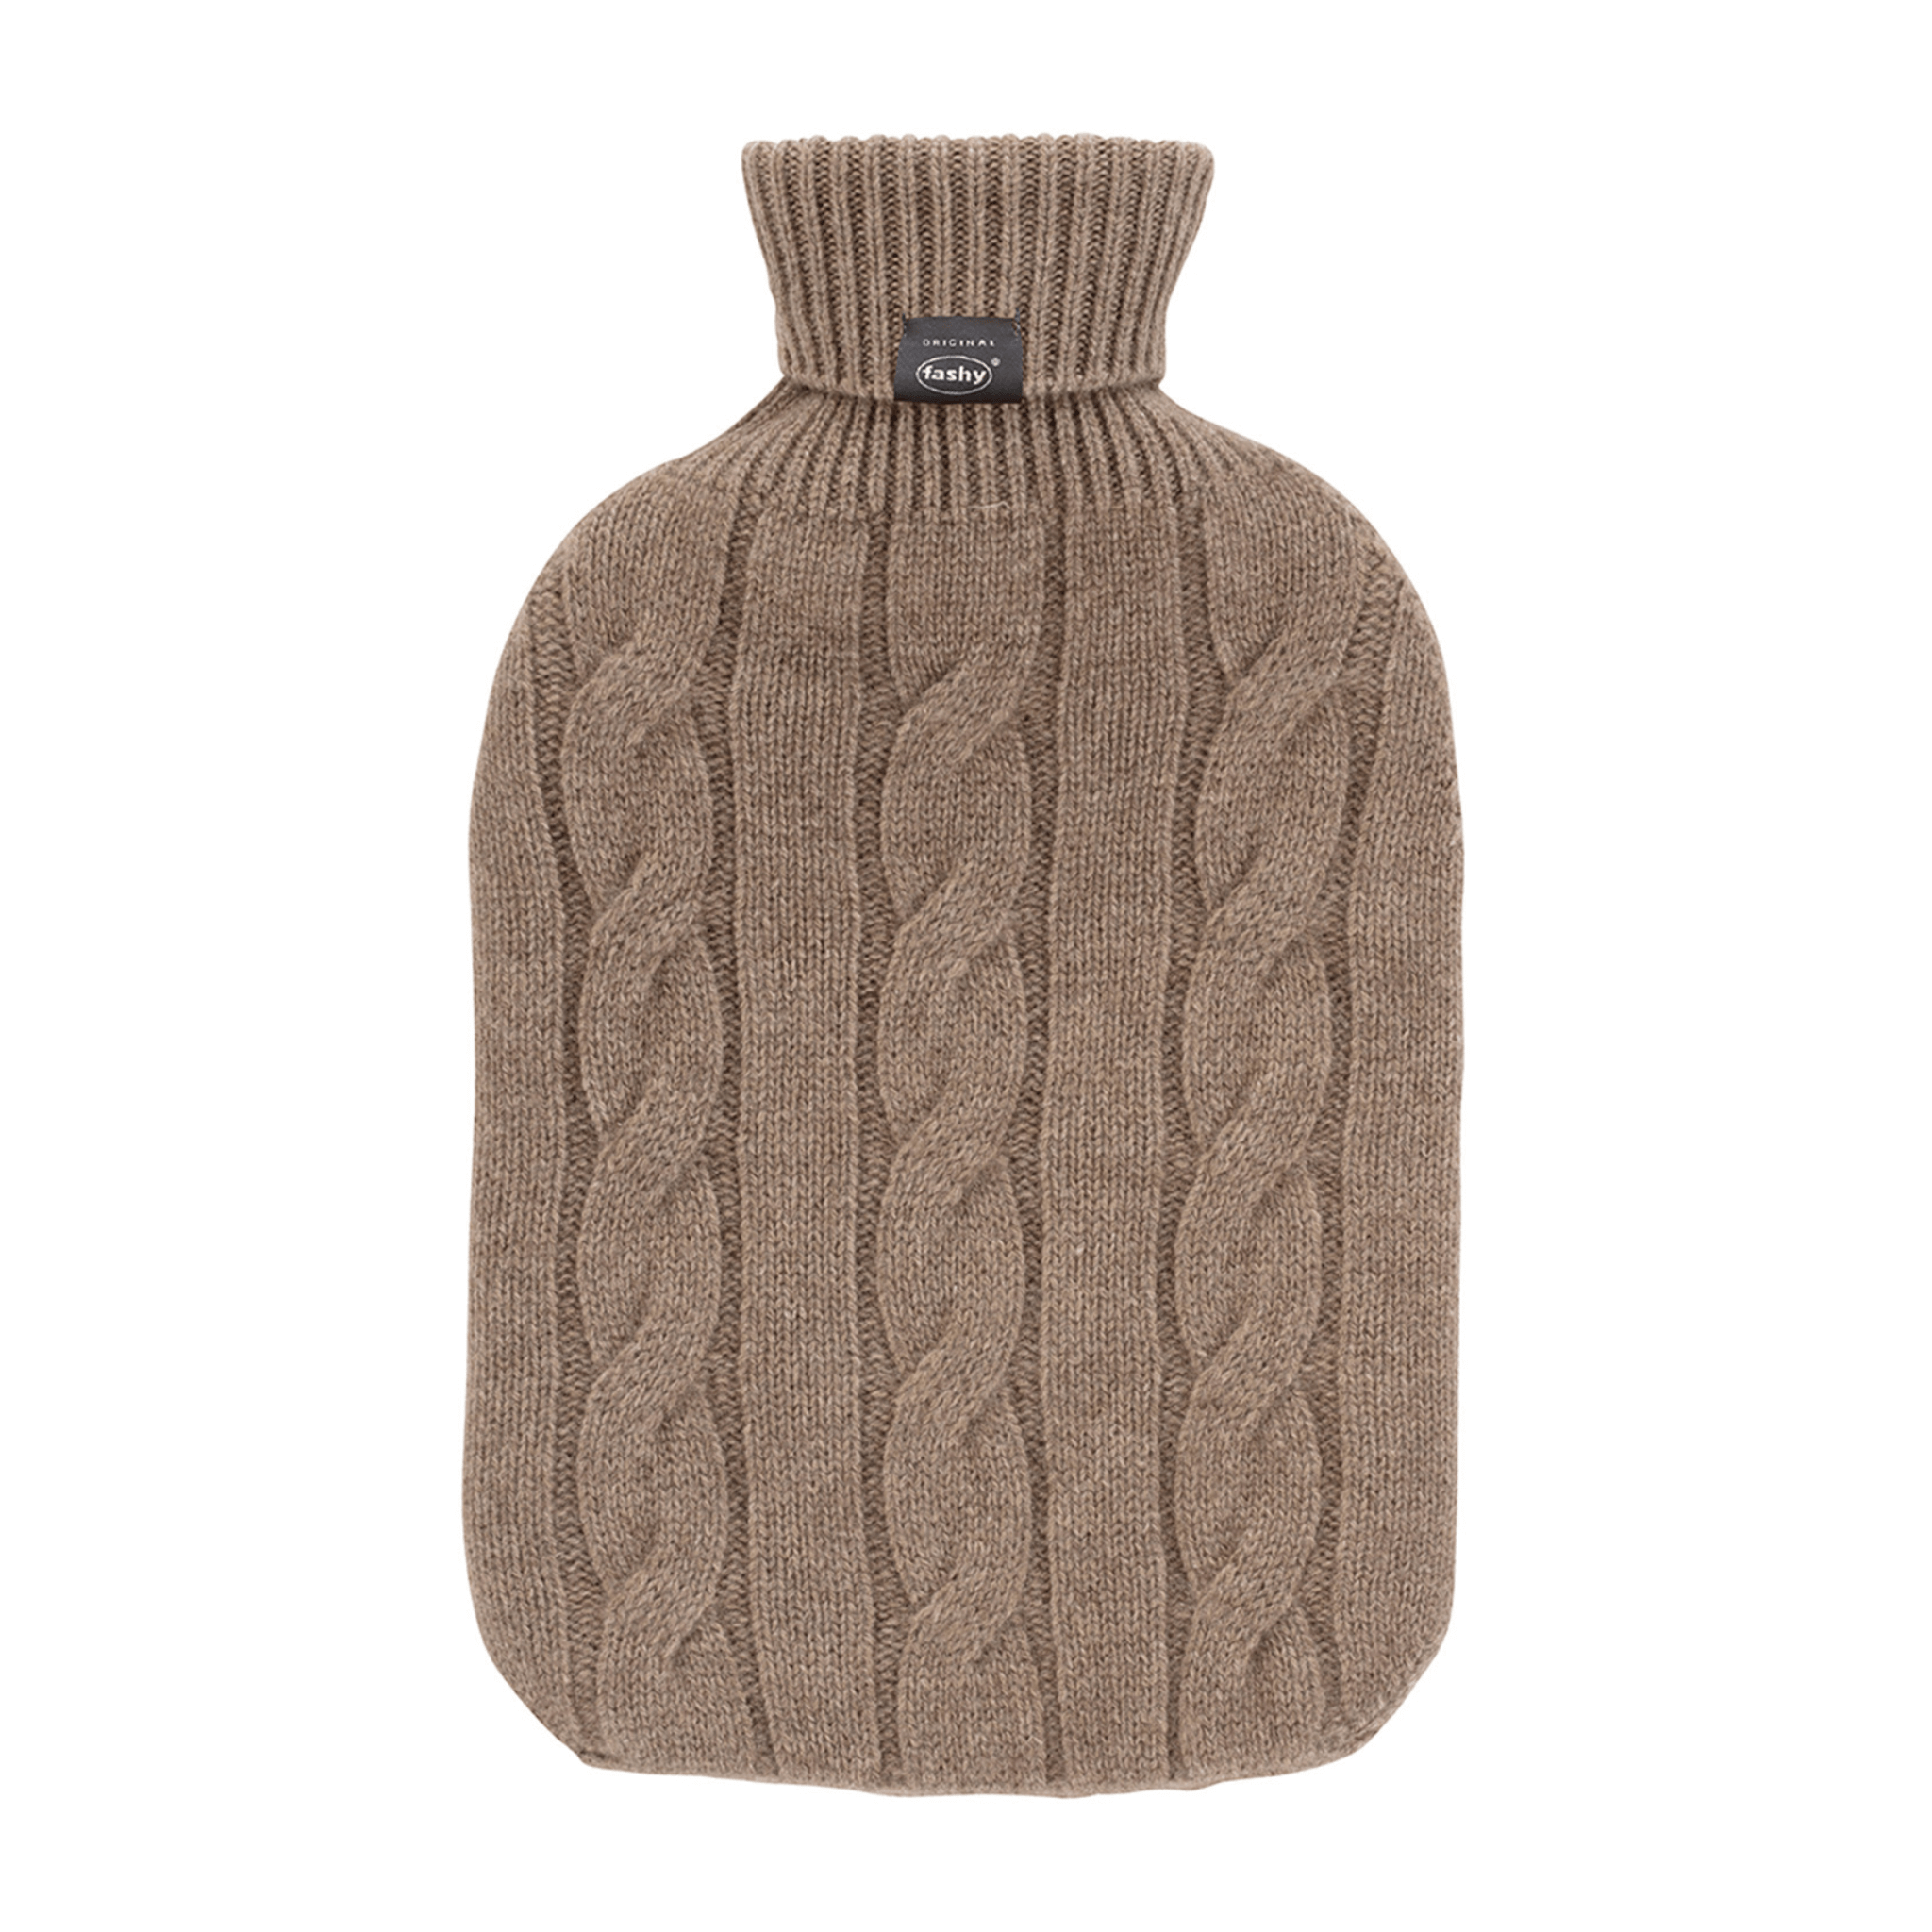 2 Litre Fashy Hot Water Bottle with Camel Plaid Knit Cashmere Cover